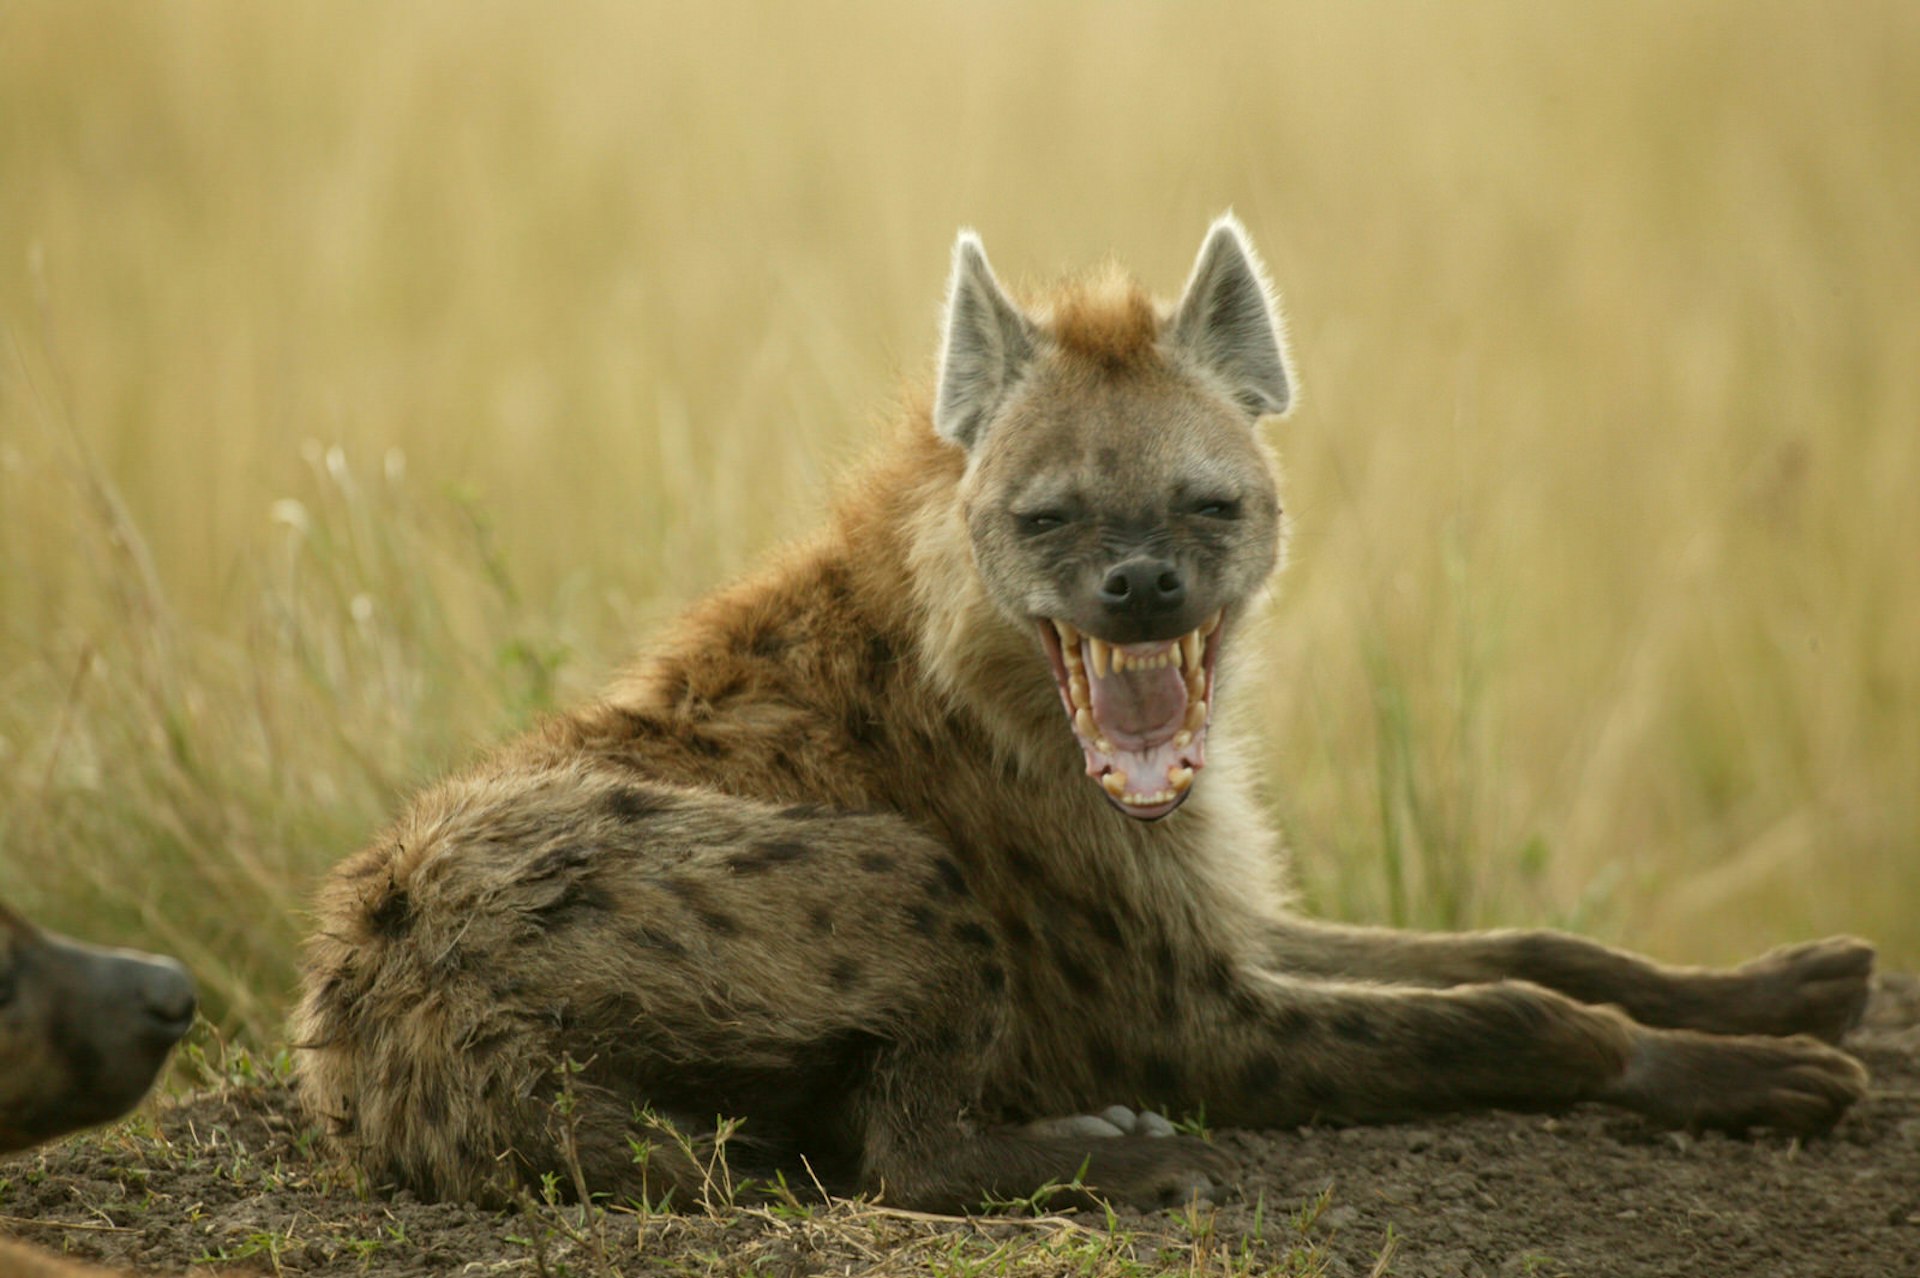 A spotted hyena laying down with its head up looks at the camera with its jaws open, looking much like it is smiling for the camera